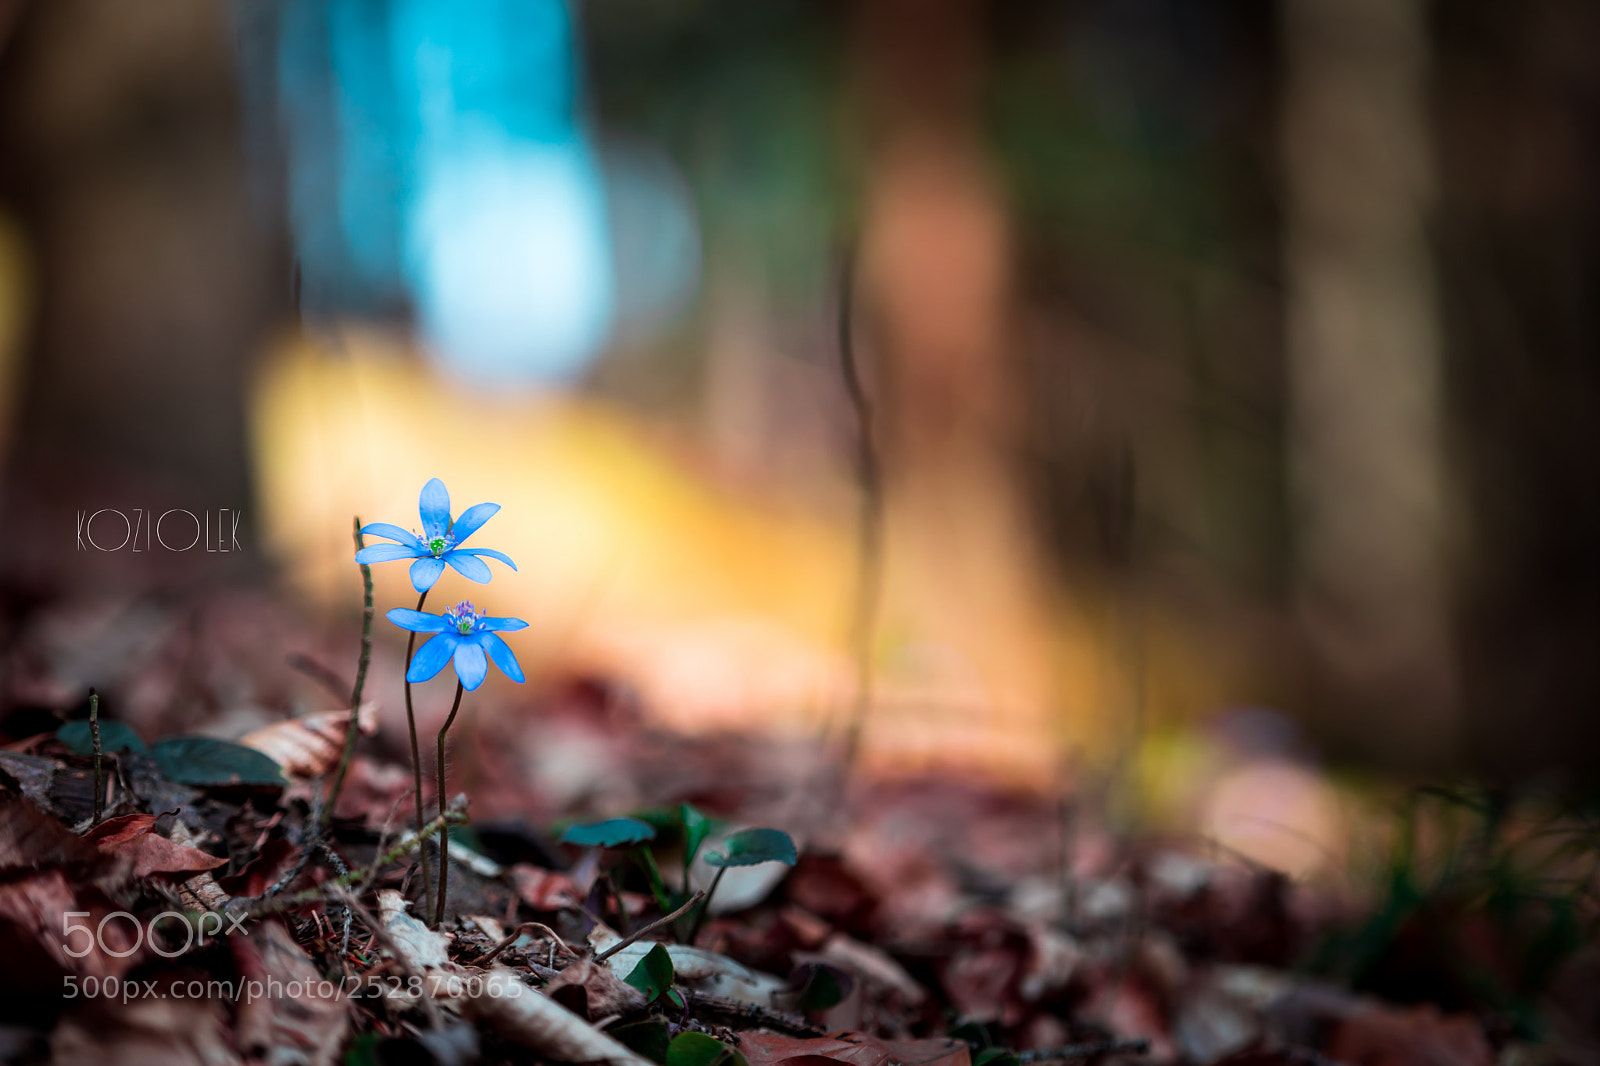 Sony a7 sample photo. Little blue flower in photography